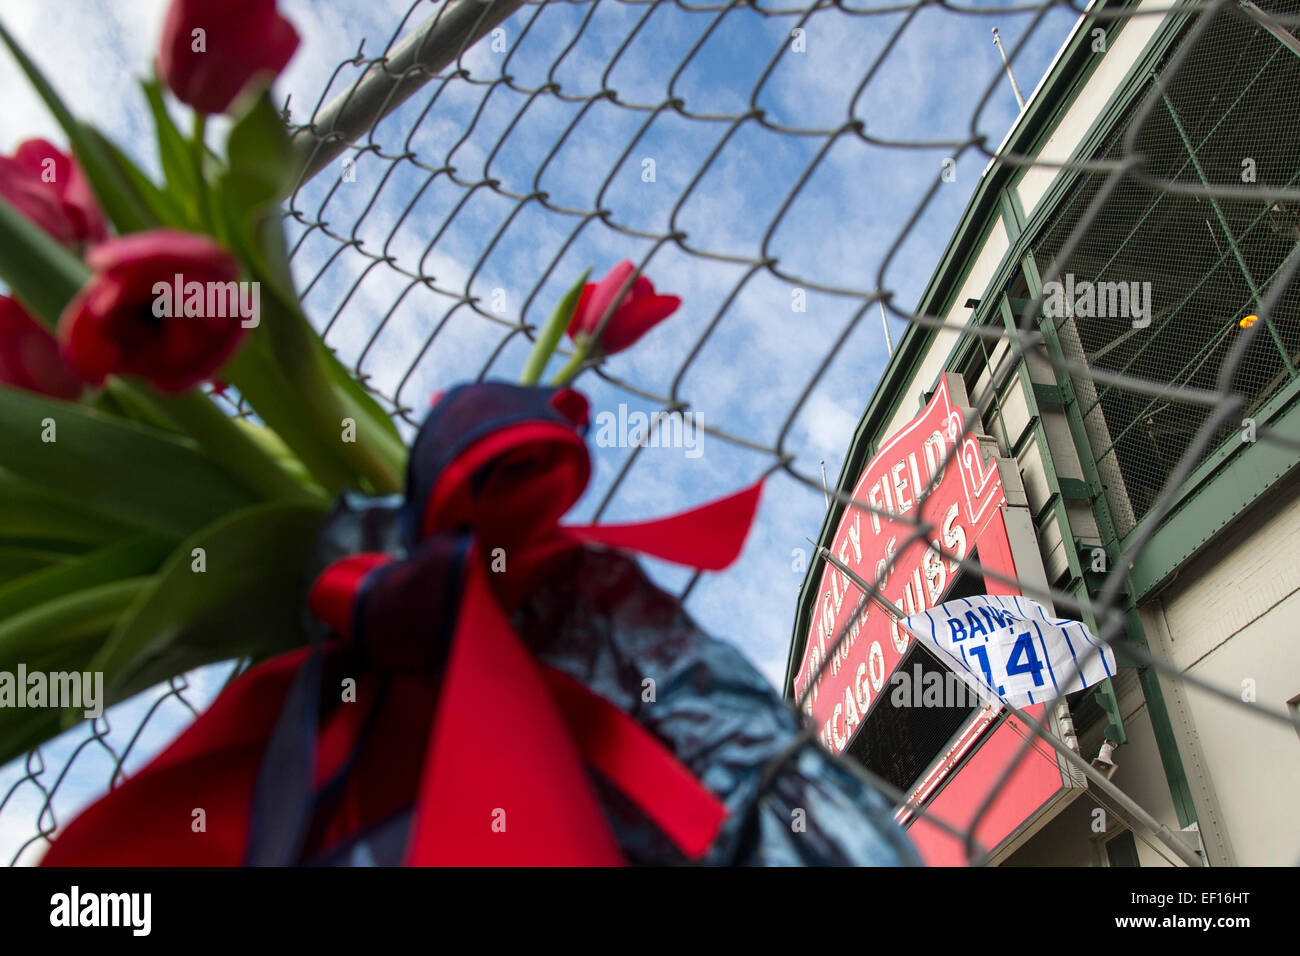 January 24, 2015: Chicago Cubs great and ambassador of Baseball Earnie Banks dies at the age of 83. Flowers are hung in memoriam on the fence as Earnie Banks uniform number 14 waves in the background outside Wrigely Field. Mandatory credit: Kostas Lymperopoulos/CSM Stock Photo